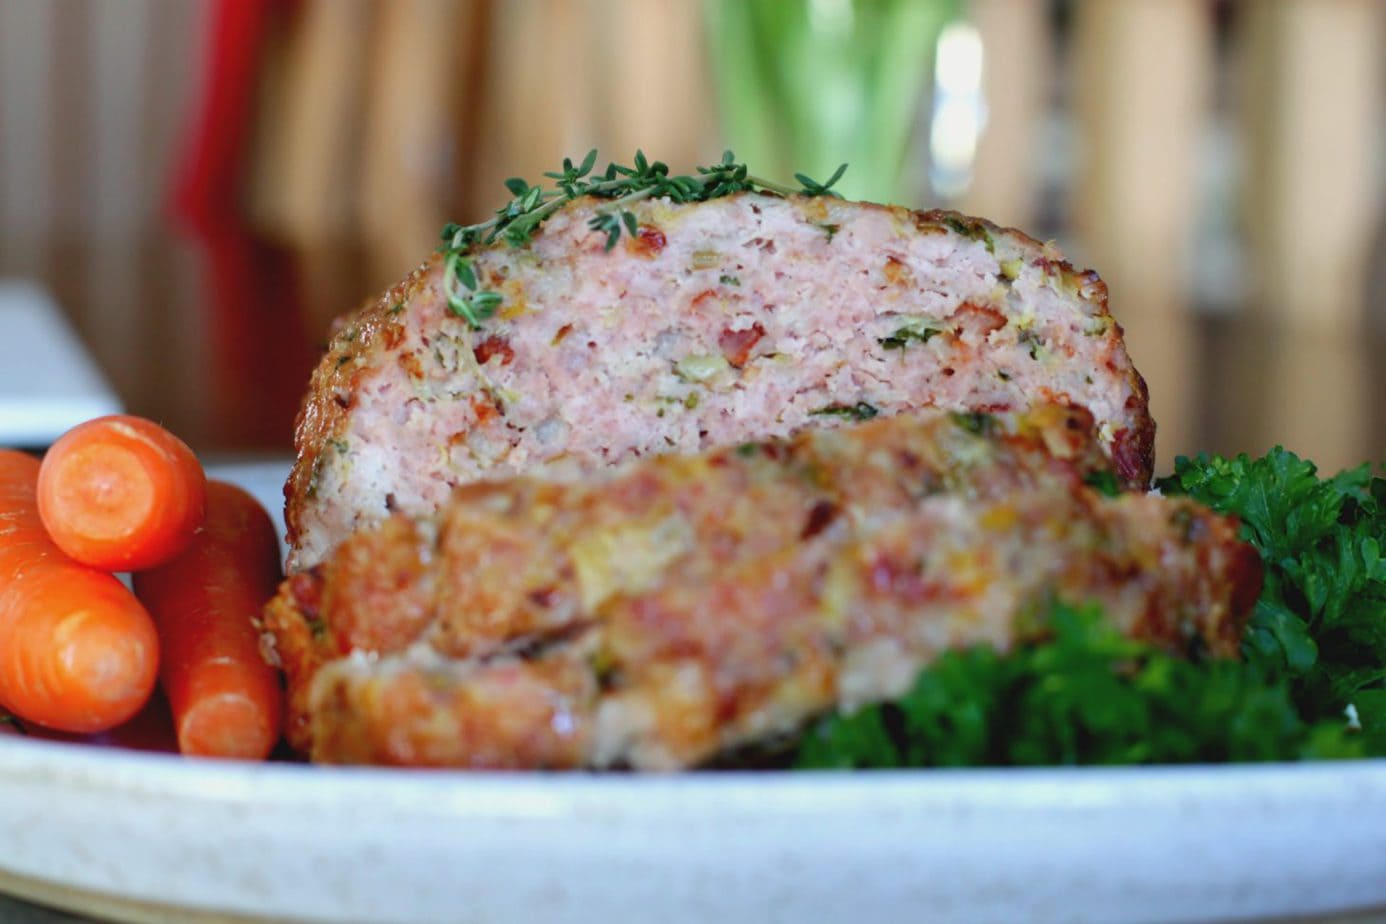 Close up of a sliced pork meatloaf topped with thyme and surrounded by carrots and kale.